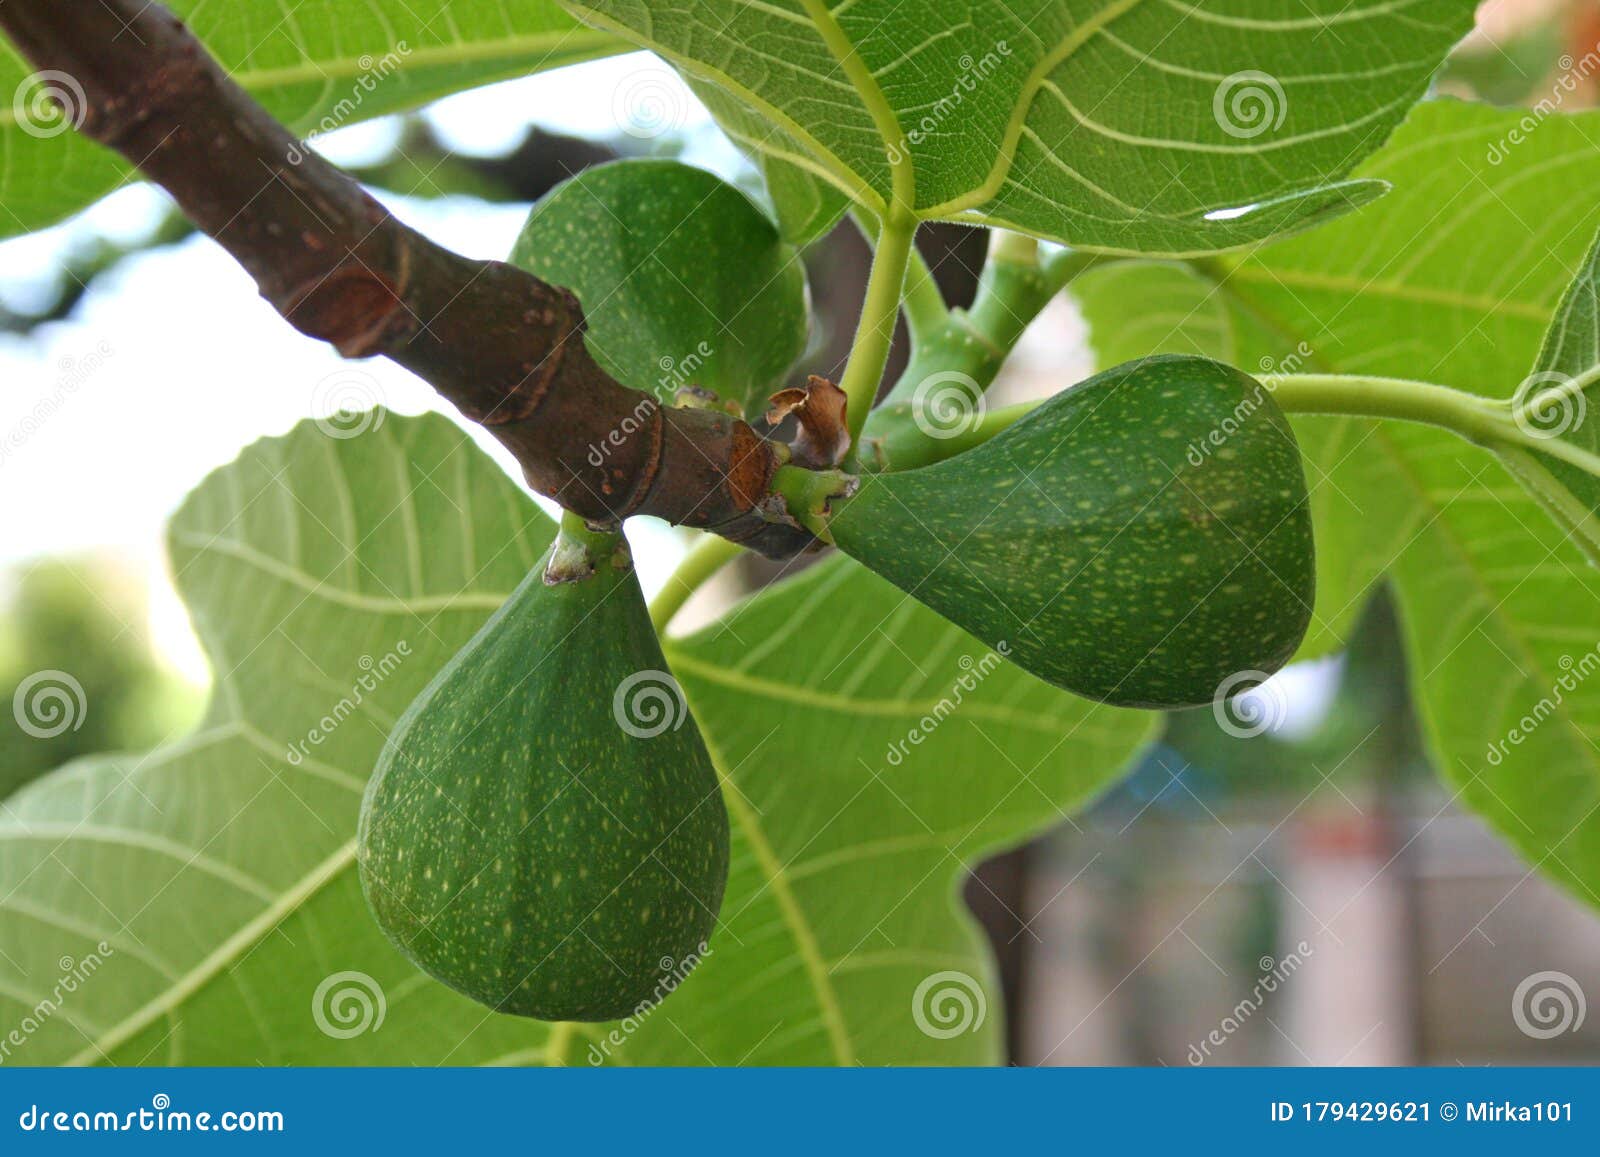 detail of the flowers of a fig tree, or its small figs